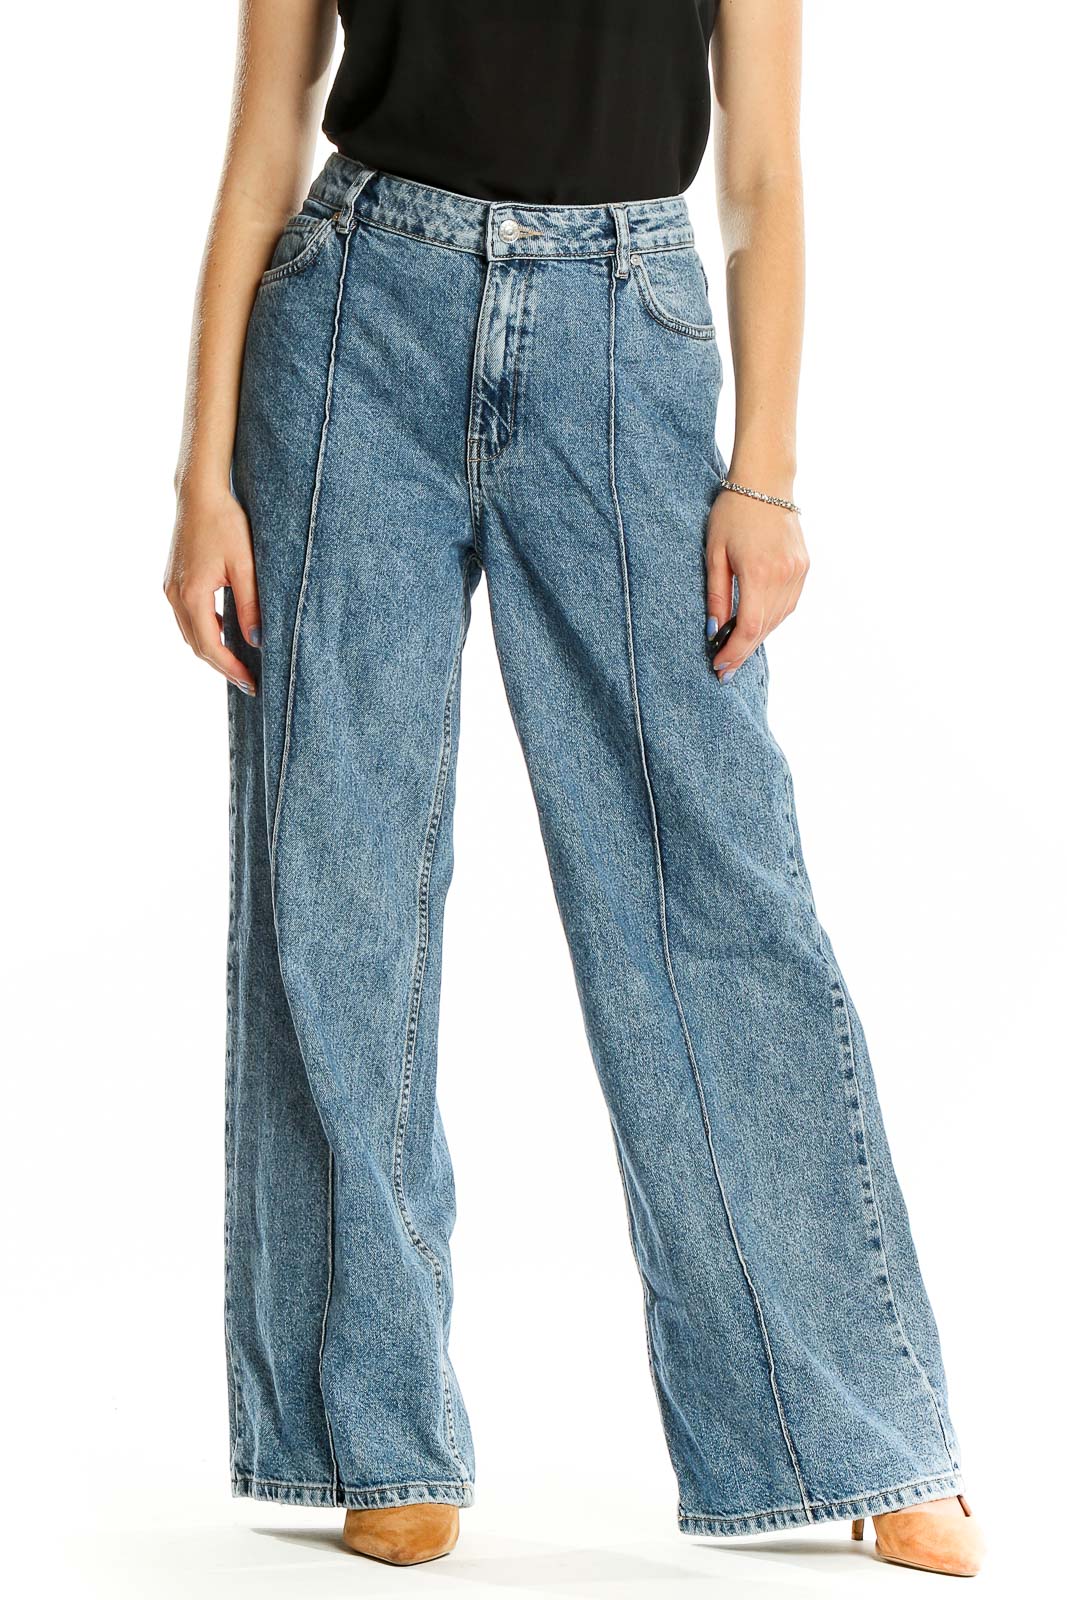 Blue Front Seam Wide Leg Full Length Jeans Front